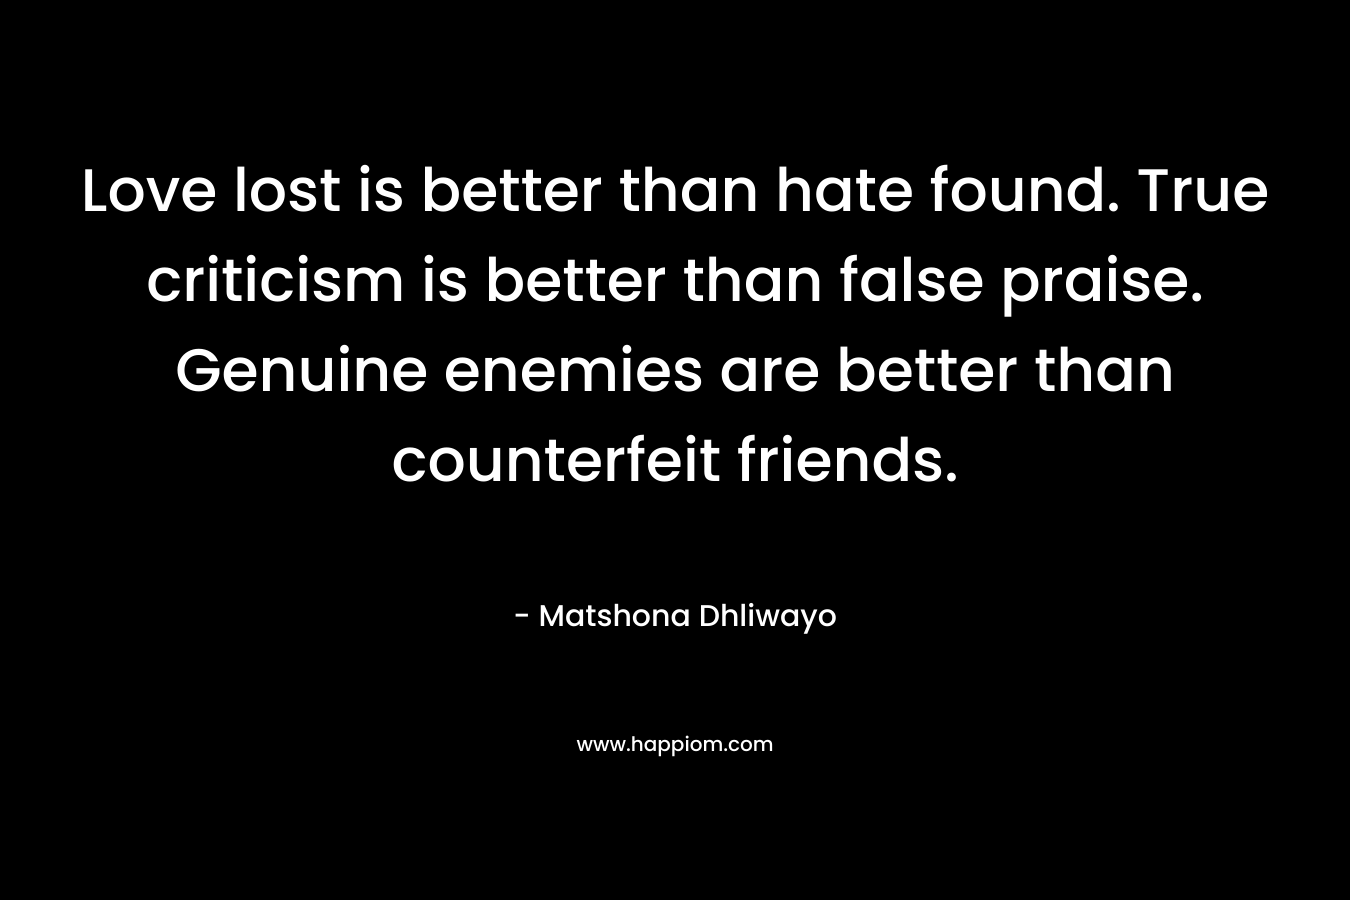 Love lost is better than hate found. True criticism is better than false praise. Genuine enemies are better than counterfeit friends.